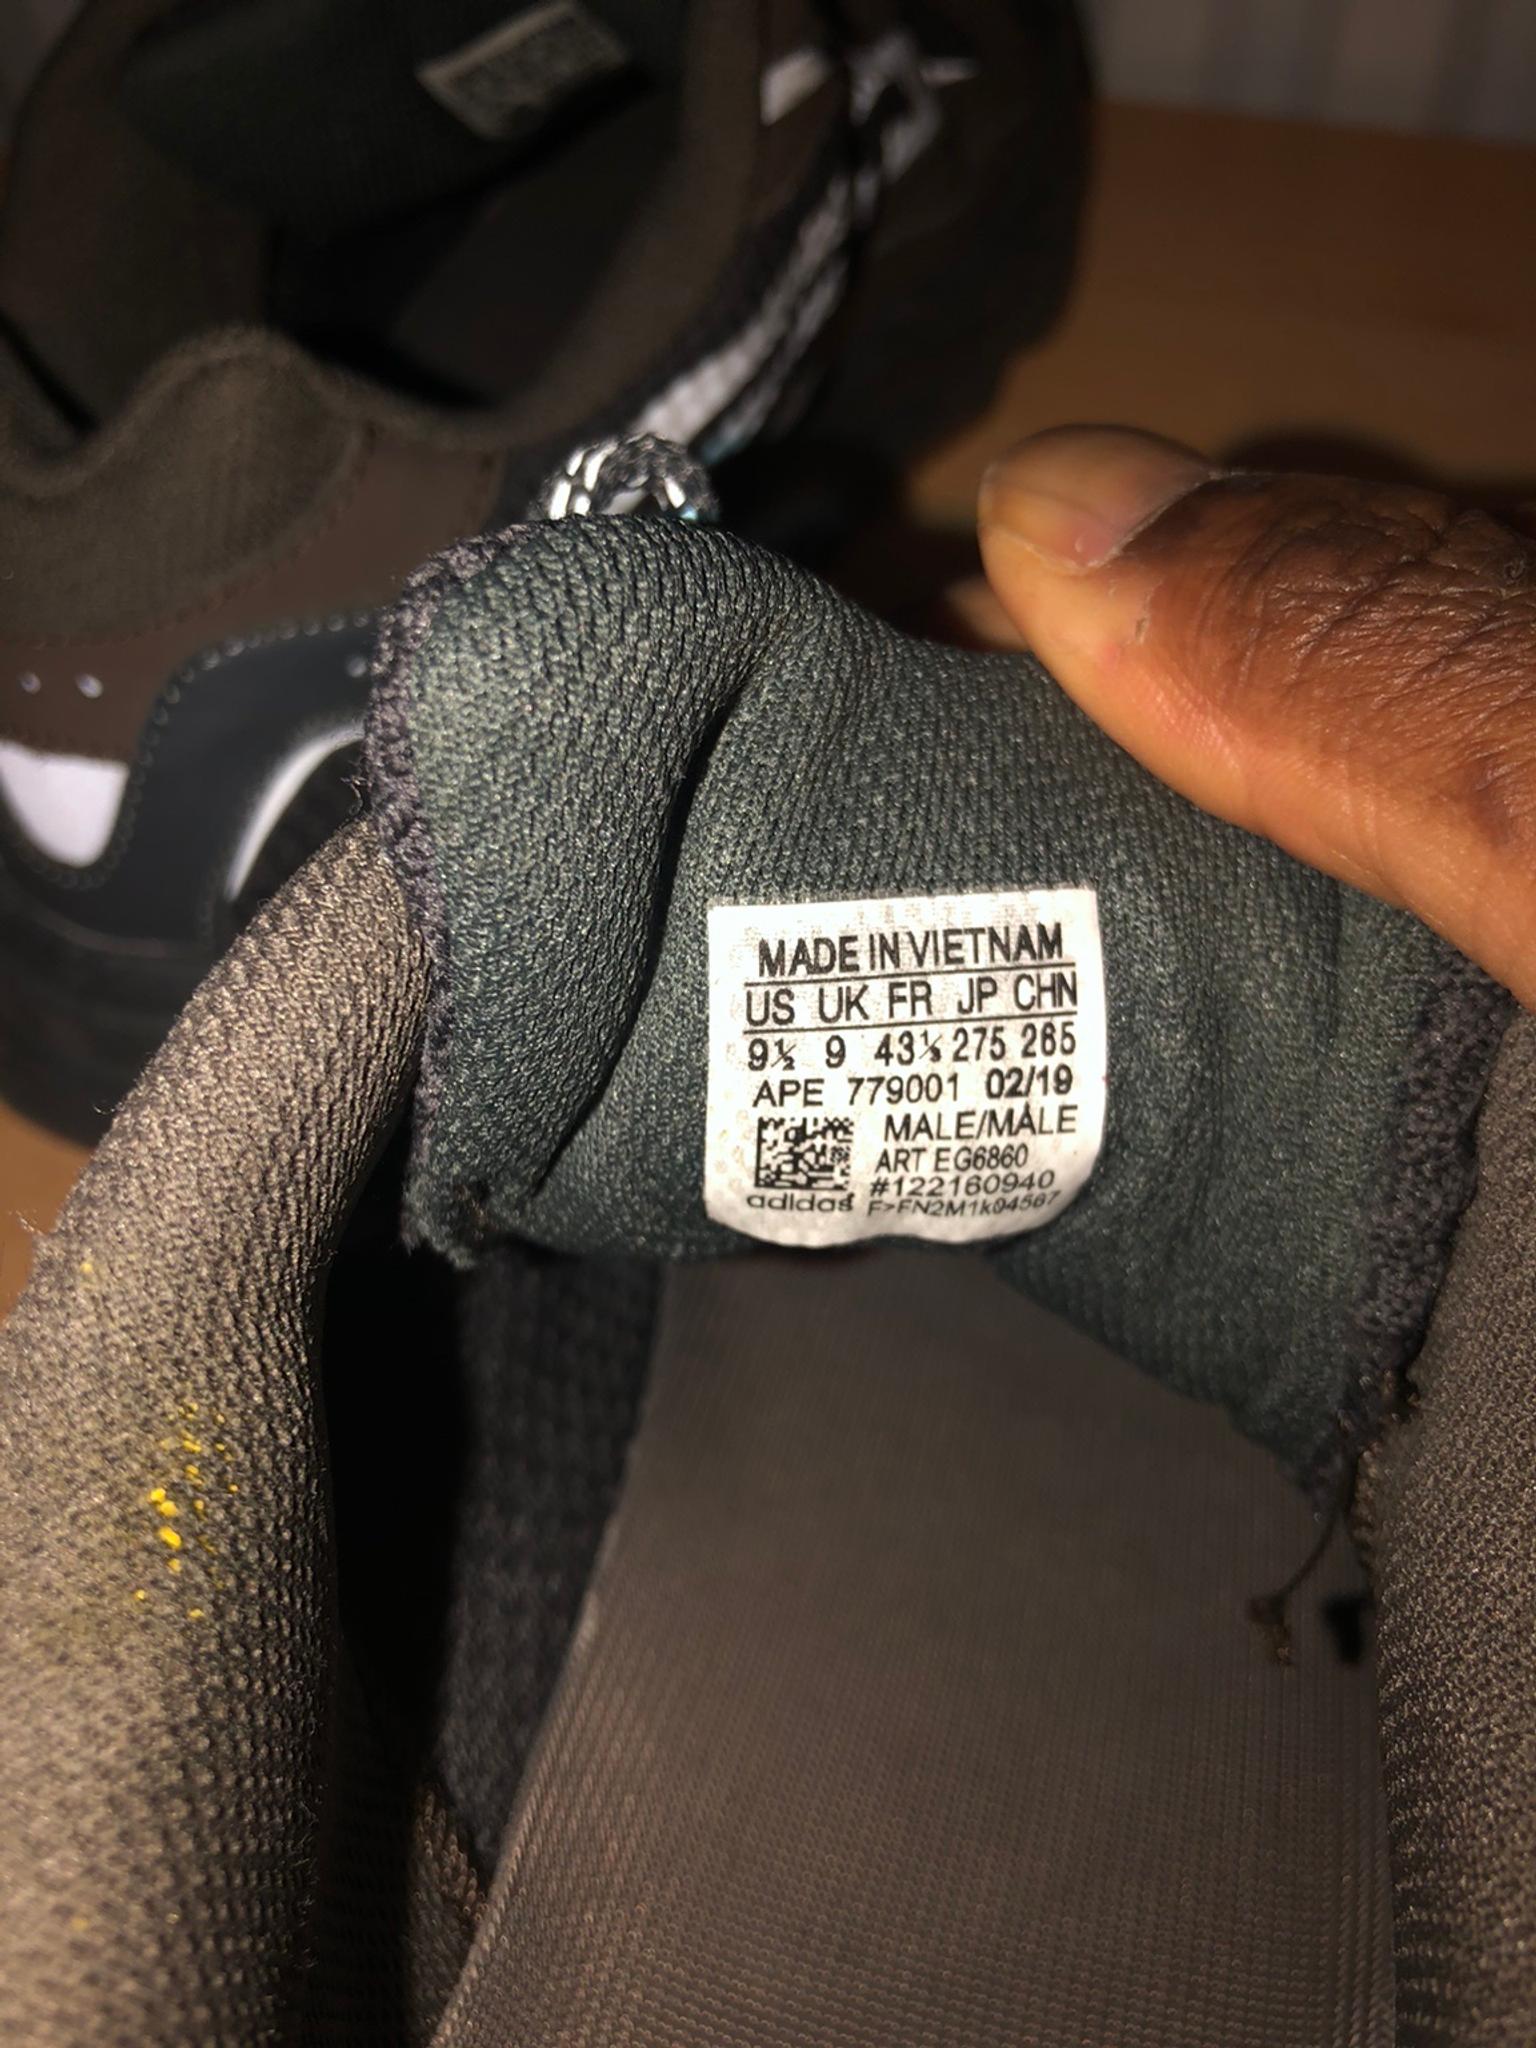 yeezy 700 made in